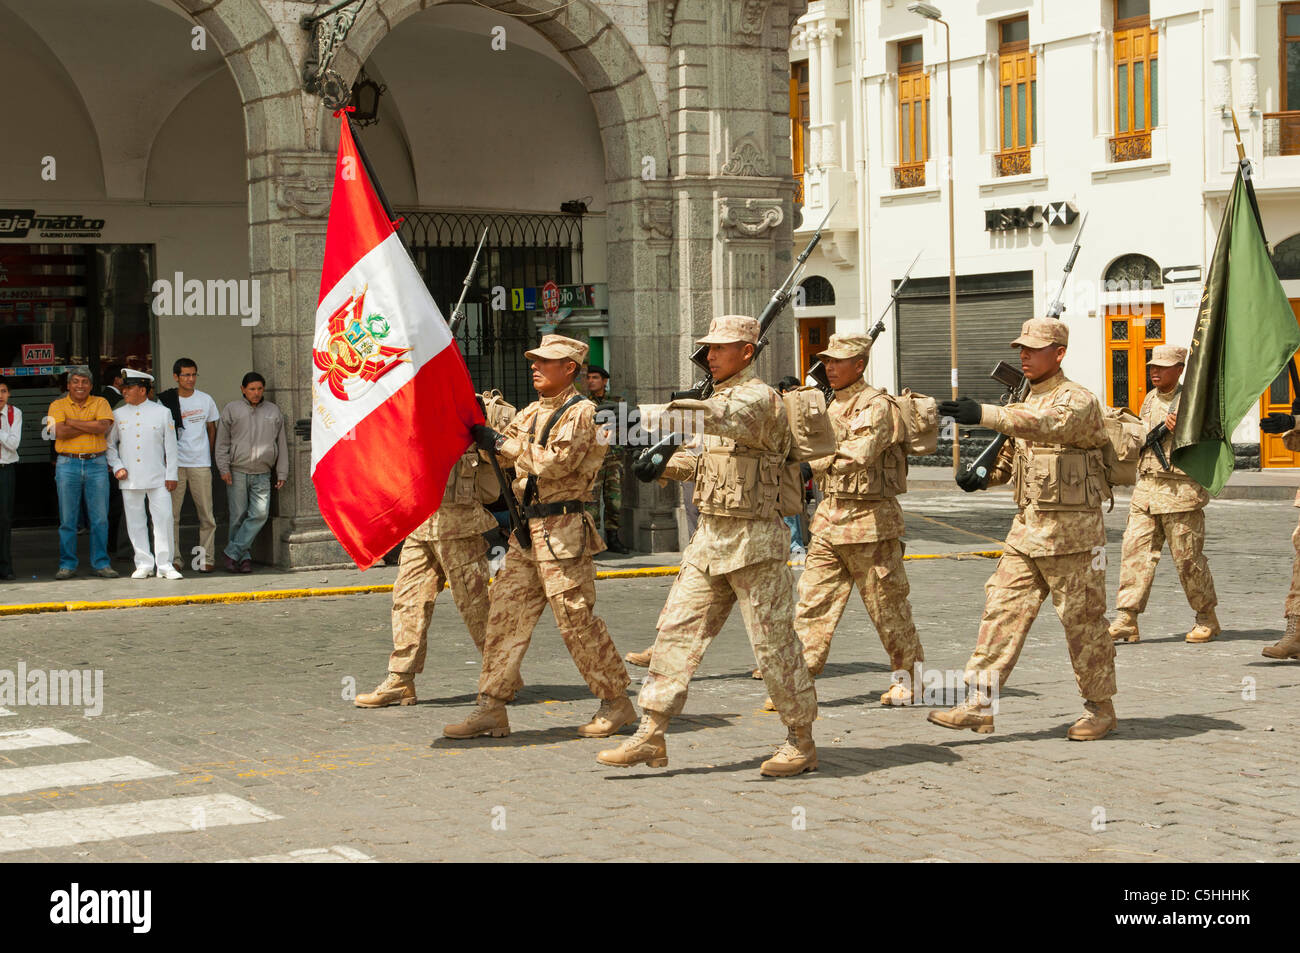 A military parade on the streets of Arequipa, Peru, South America. Stock Photo